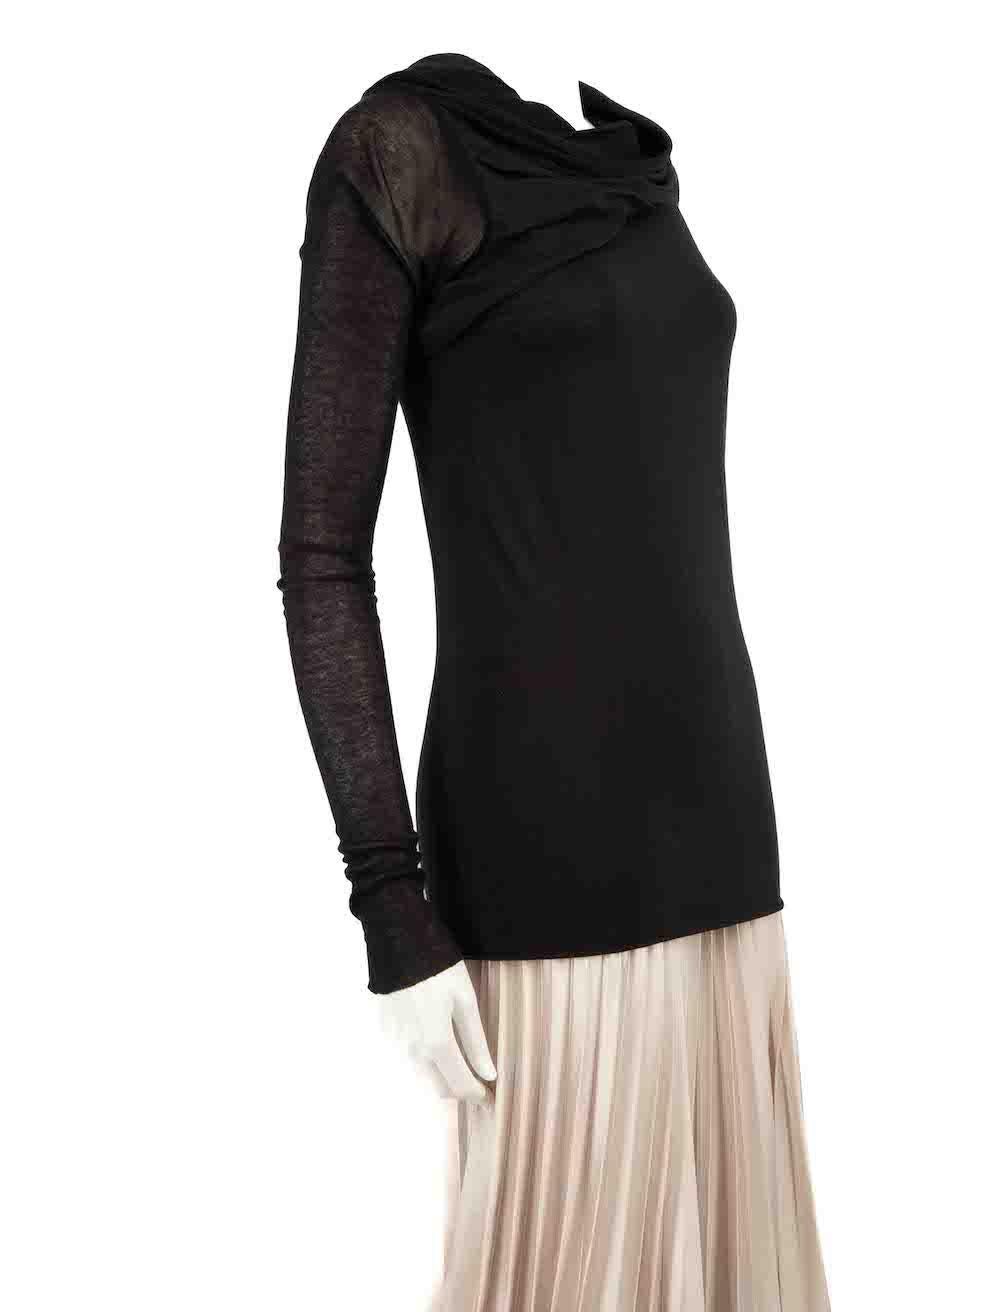 CONDITION is Very good. Hardly any visible wear to top is evident on this used Rick Owens Lilies designer resale item.
 
 Details
 Black
 Viscose
 Long sleeves top
 Stretchy
 Cowl draped neckline
 
 
 Made in Italy
 
 Composition
 70% Viscose, 15%